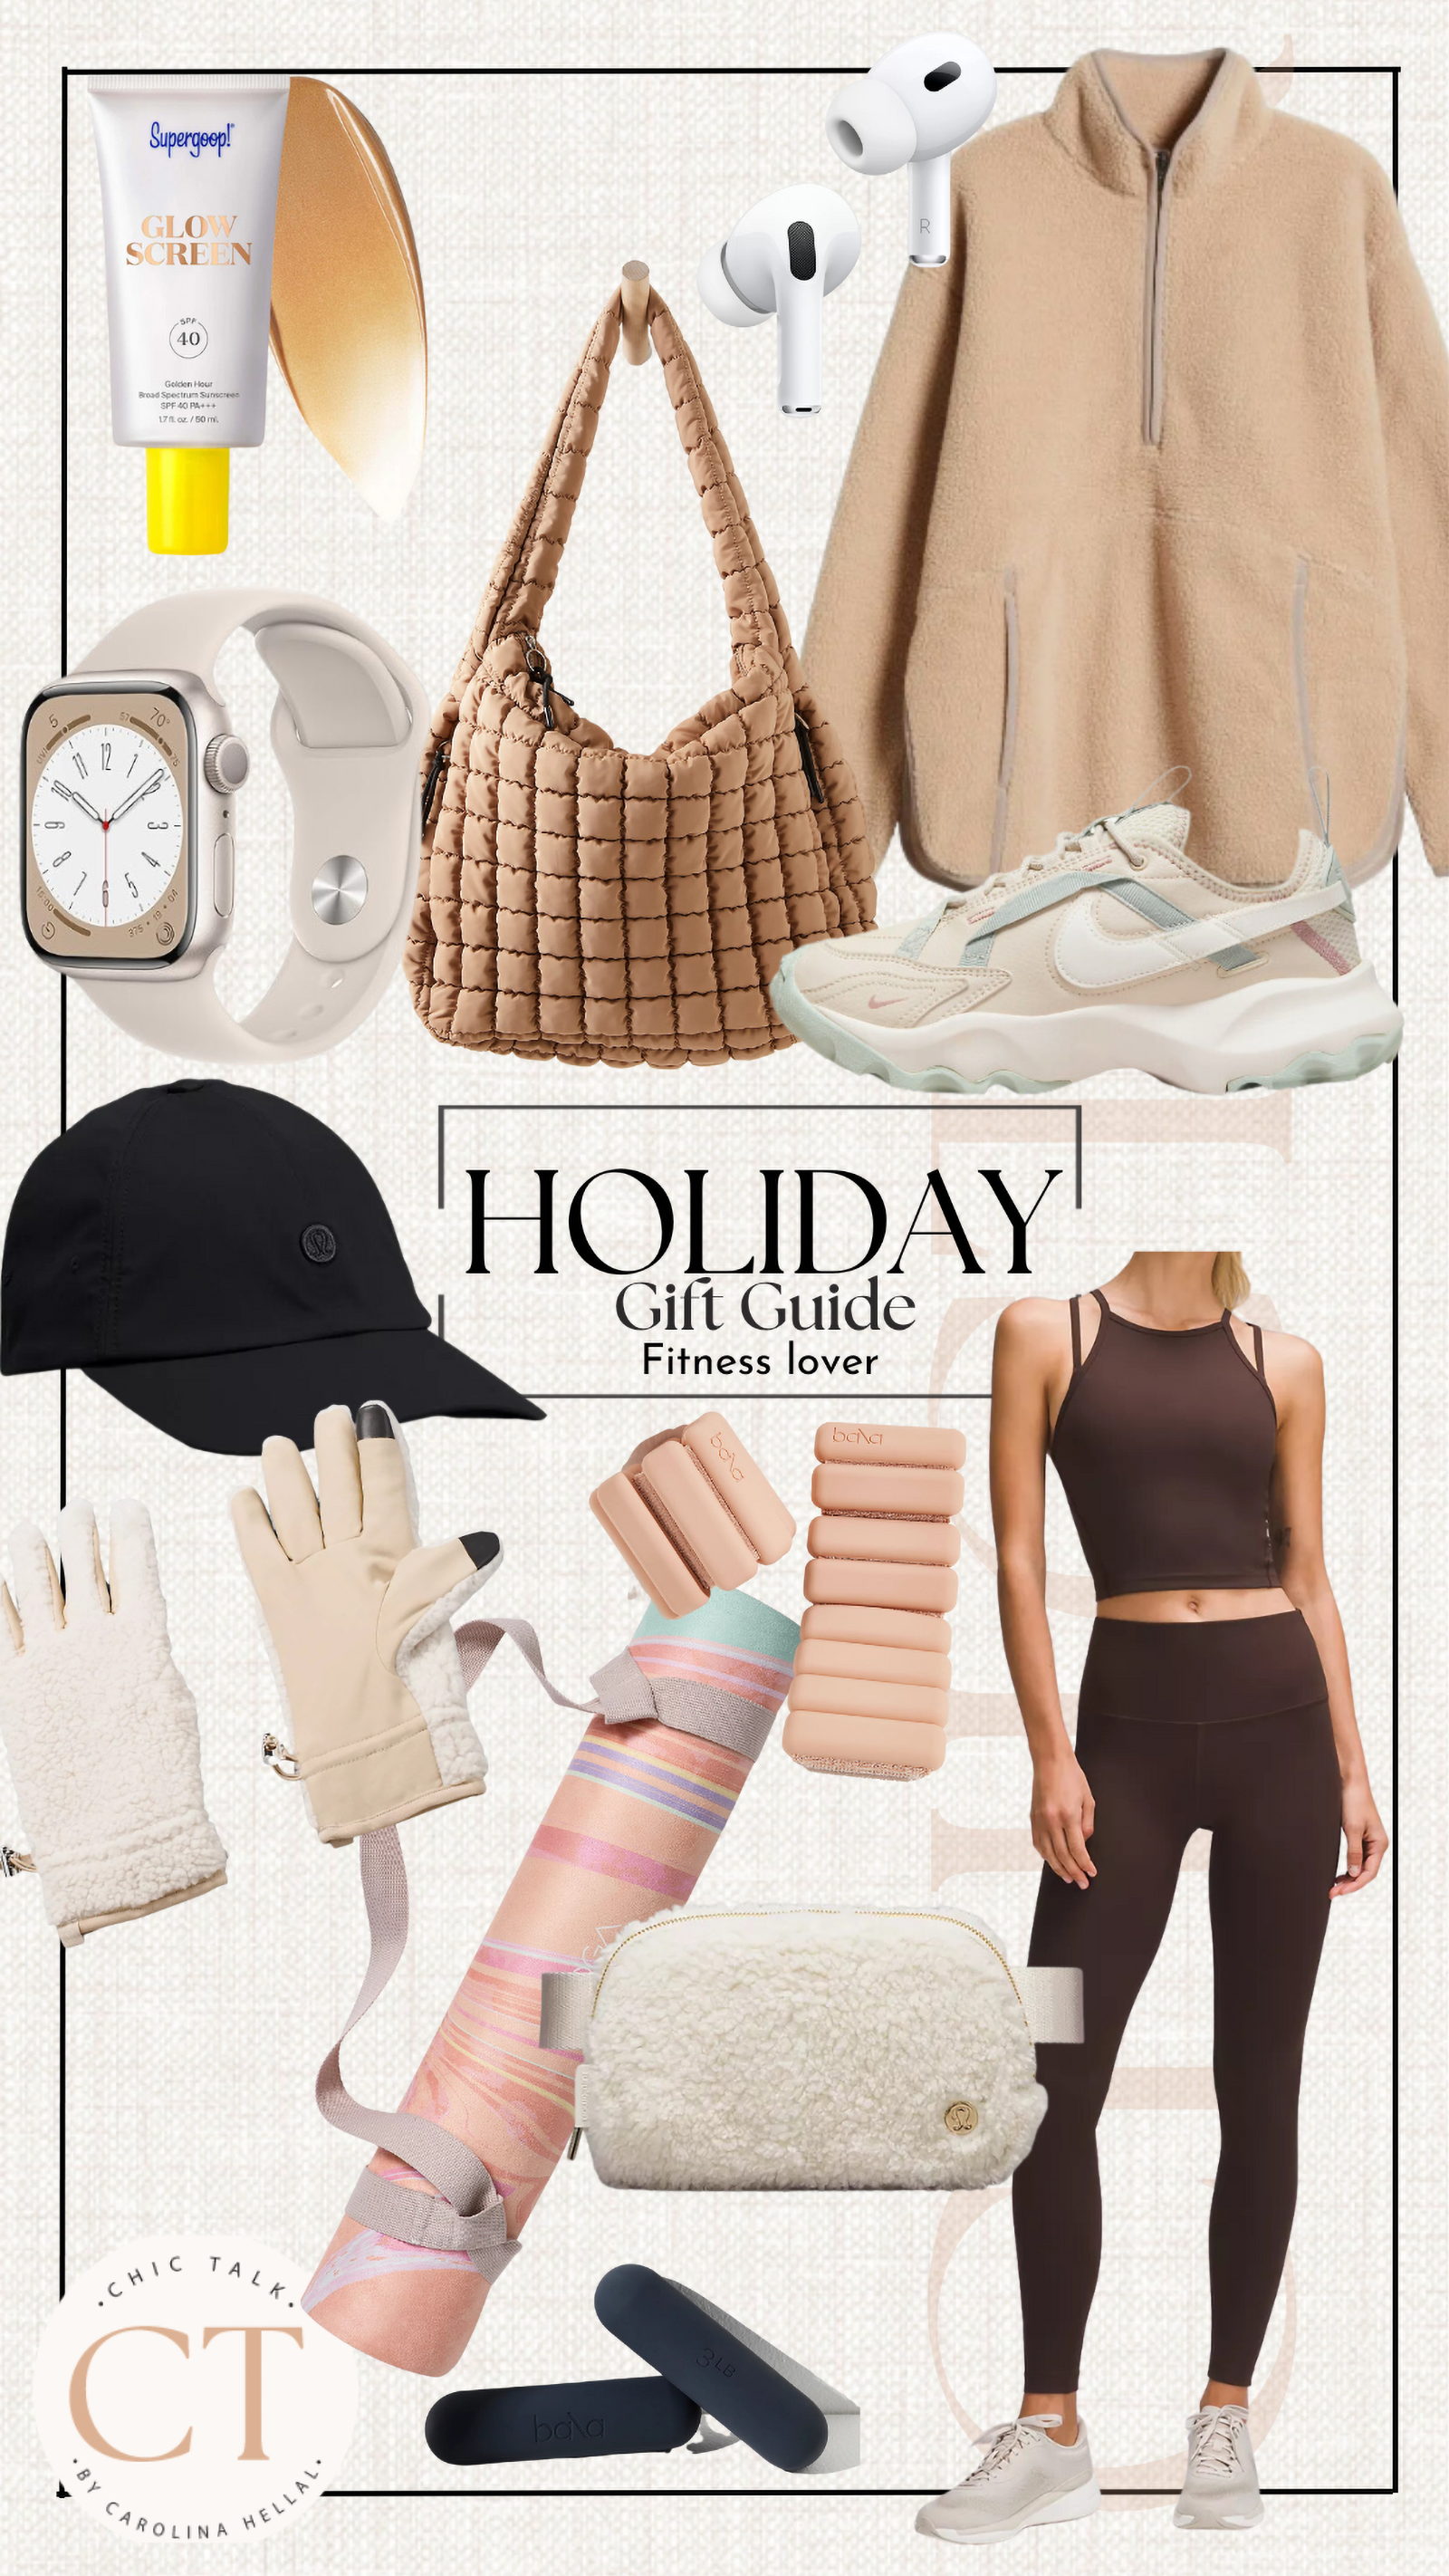 HOLIDAY GIFT GUIDE FOR FITNESS LOVER CHIC TALK